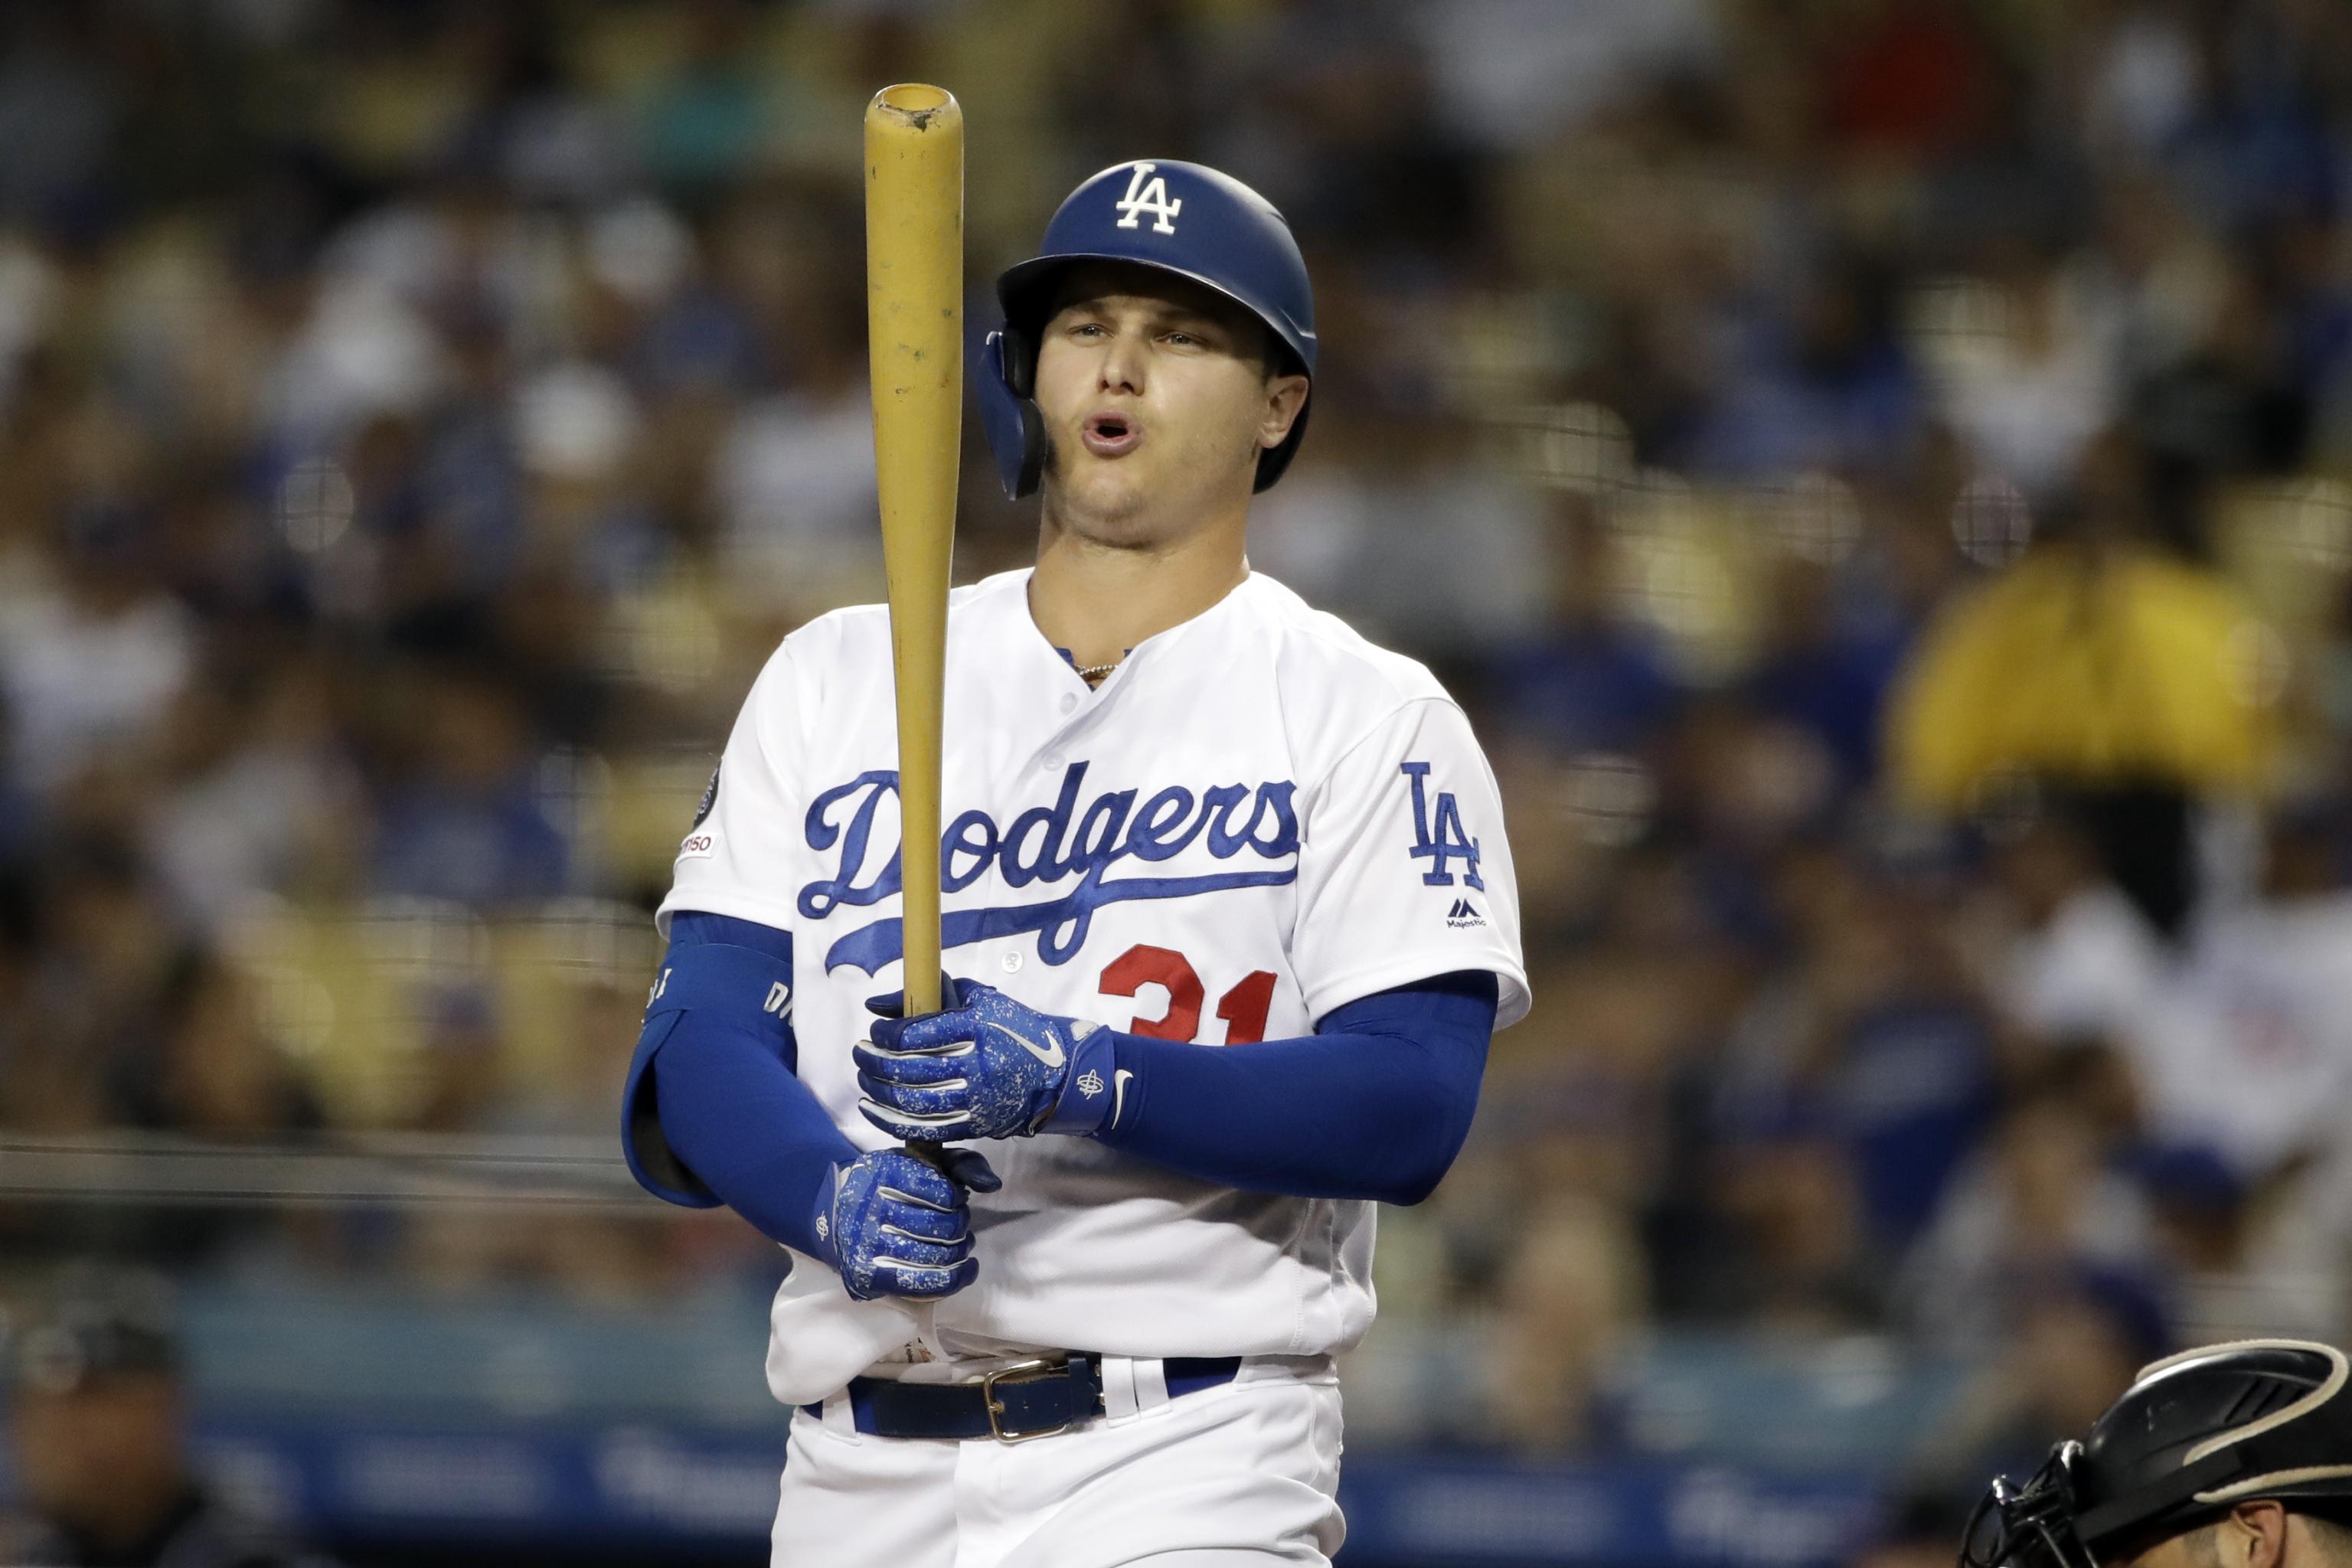 Cubs sign Joc Pederson to 1 year $7 million deal - Back Sports Page